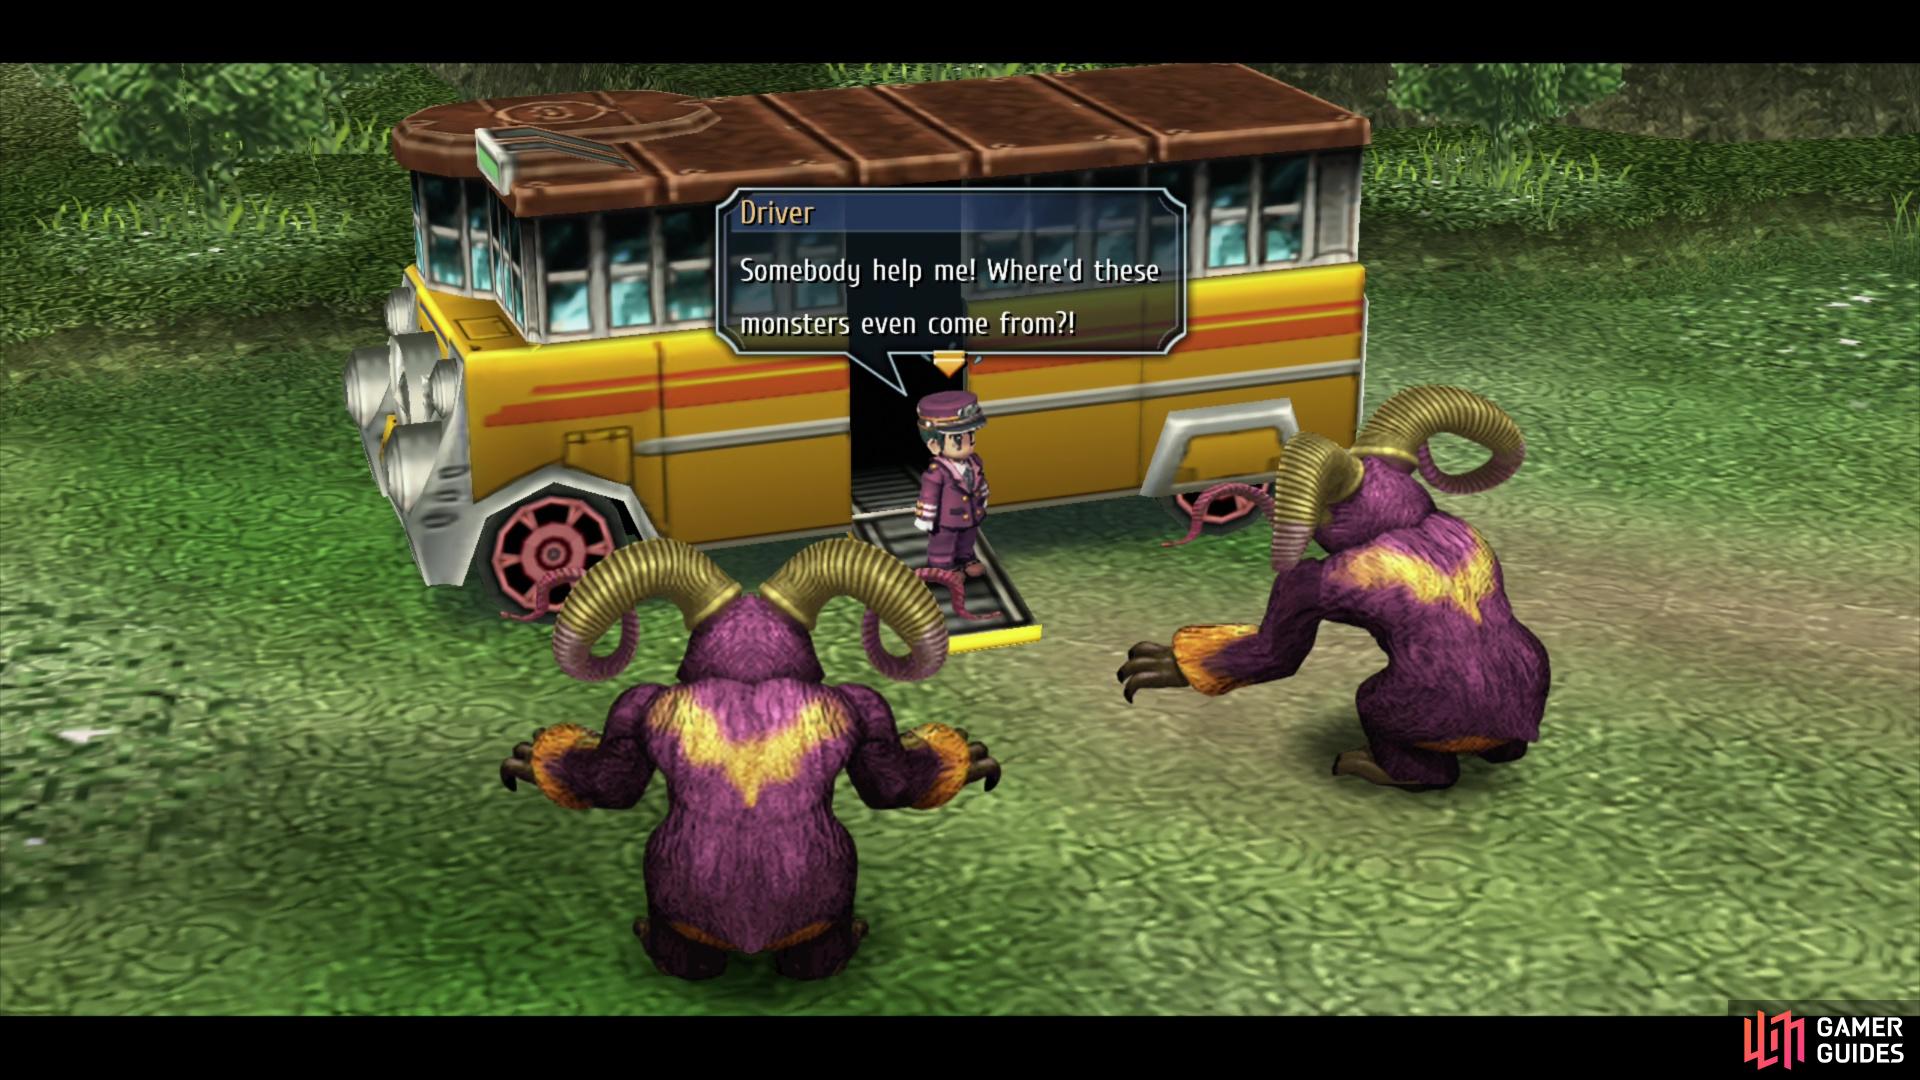 Rush through the second screen of Ursula Road until you find the cause of the bus’s delay.